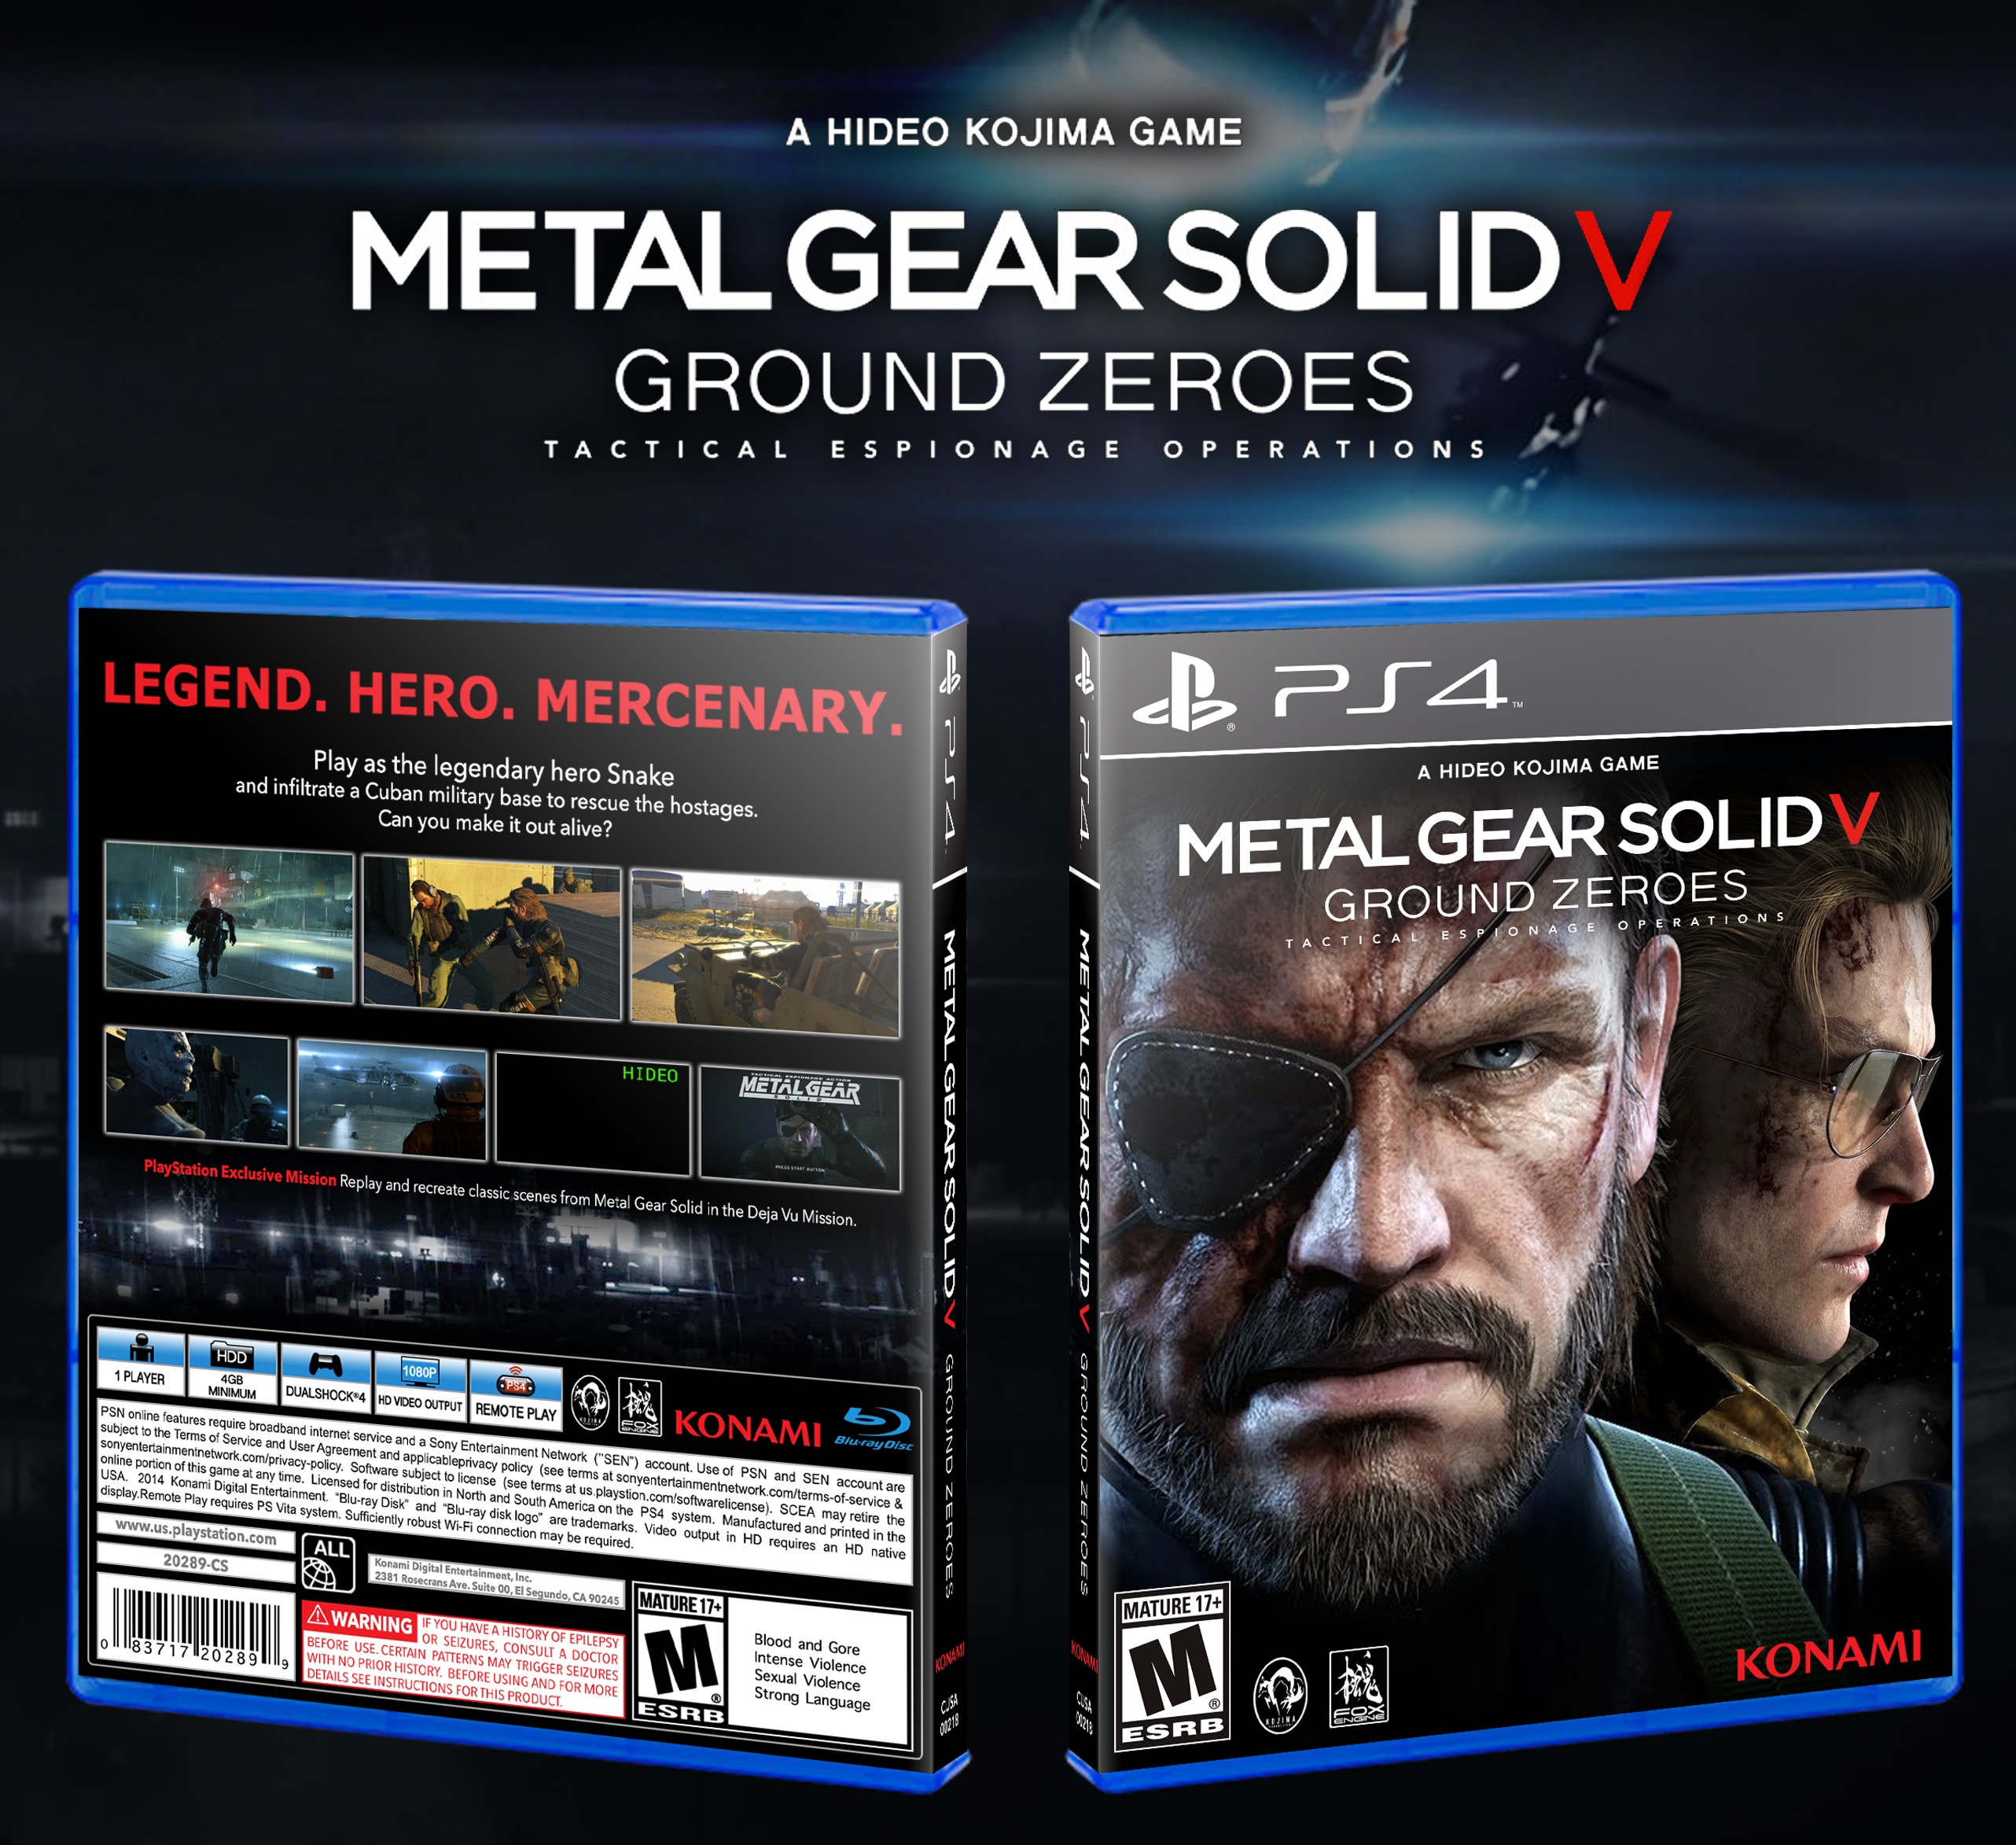 Mgs 5 ground zeroes steam фото 83